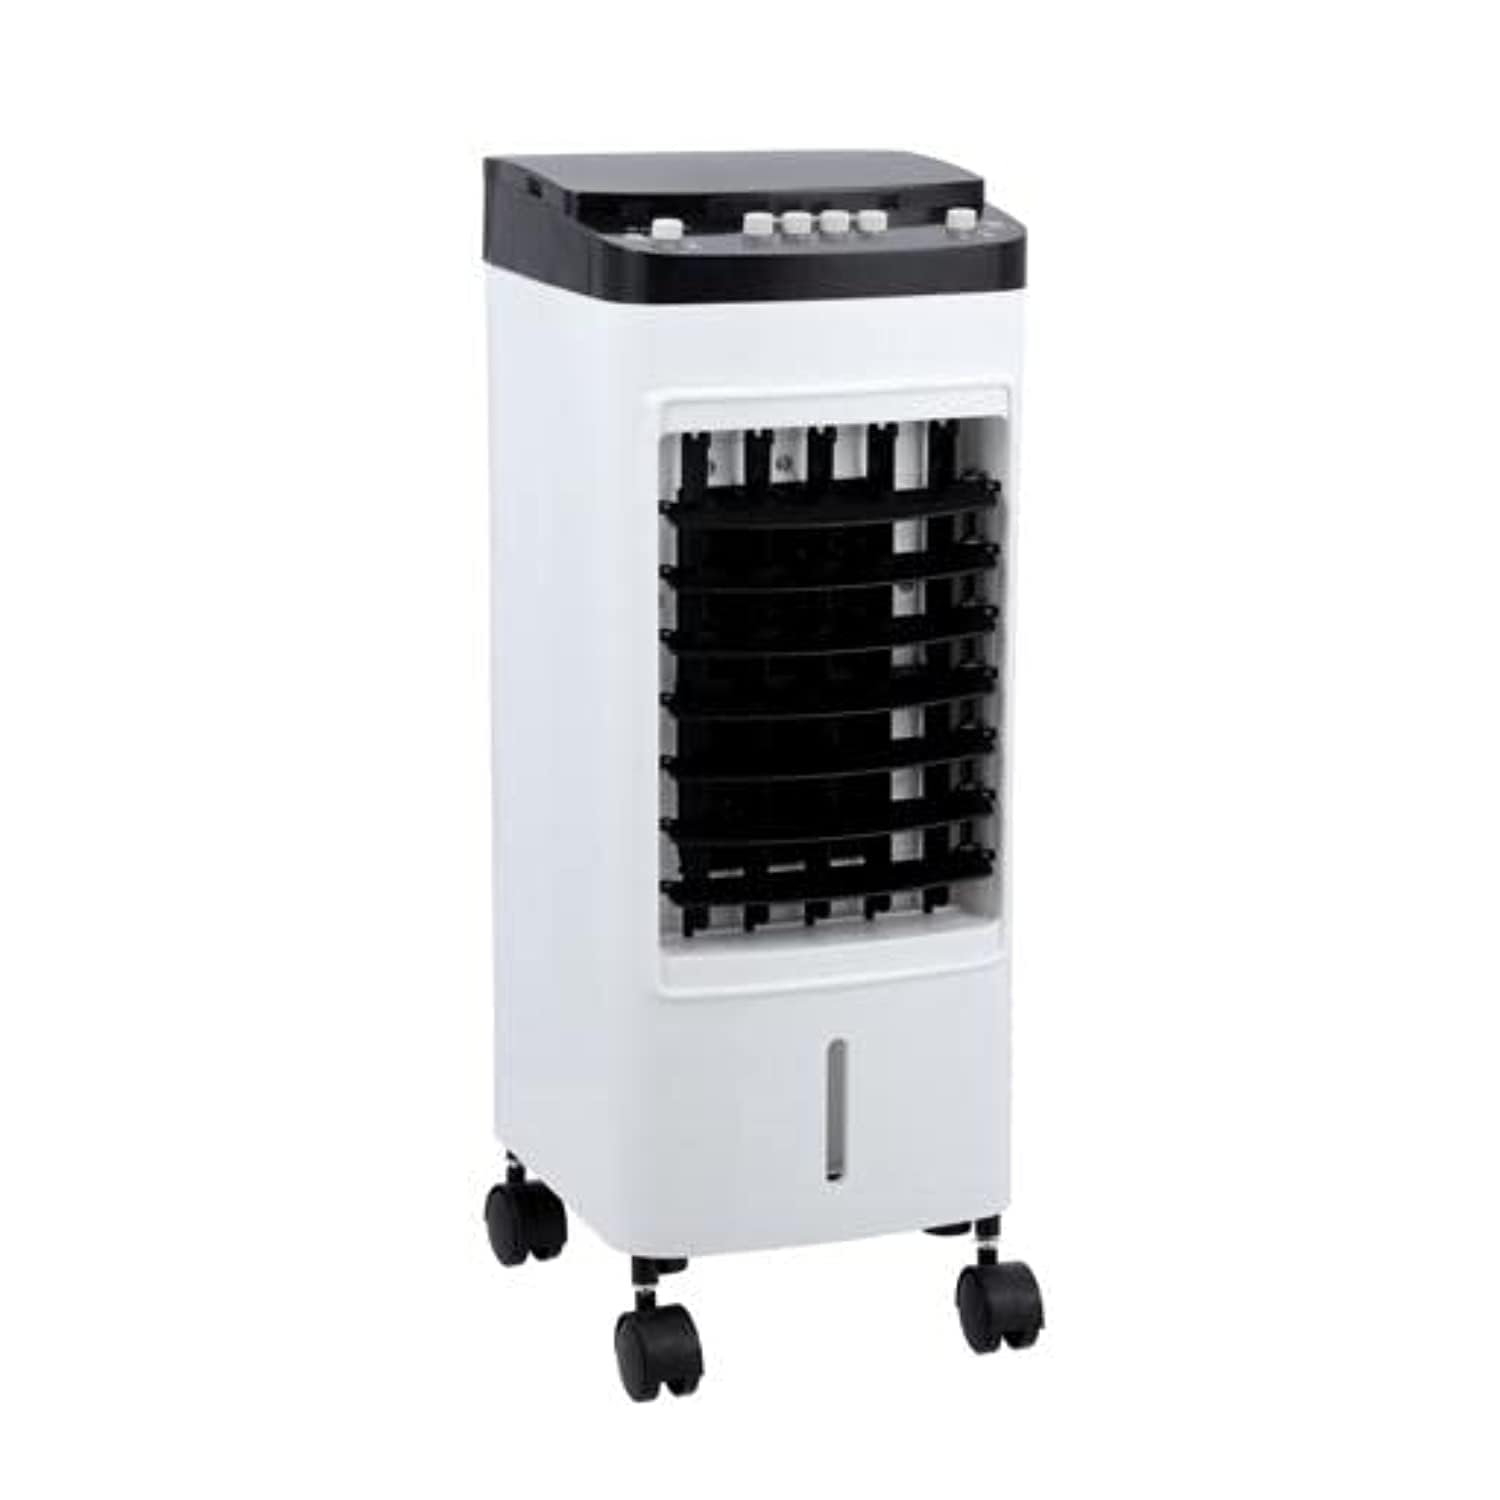 Geepas Air Cooler with 2 Ice Box, 6L Capacity, GAC16017 High Performance Motor, Easy Mobility, 3 Speed Choices Low/Med/High, Motor White